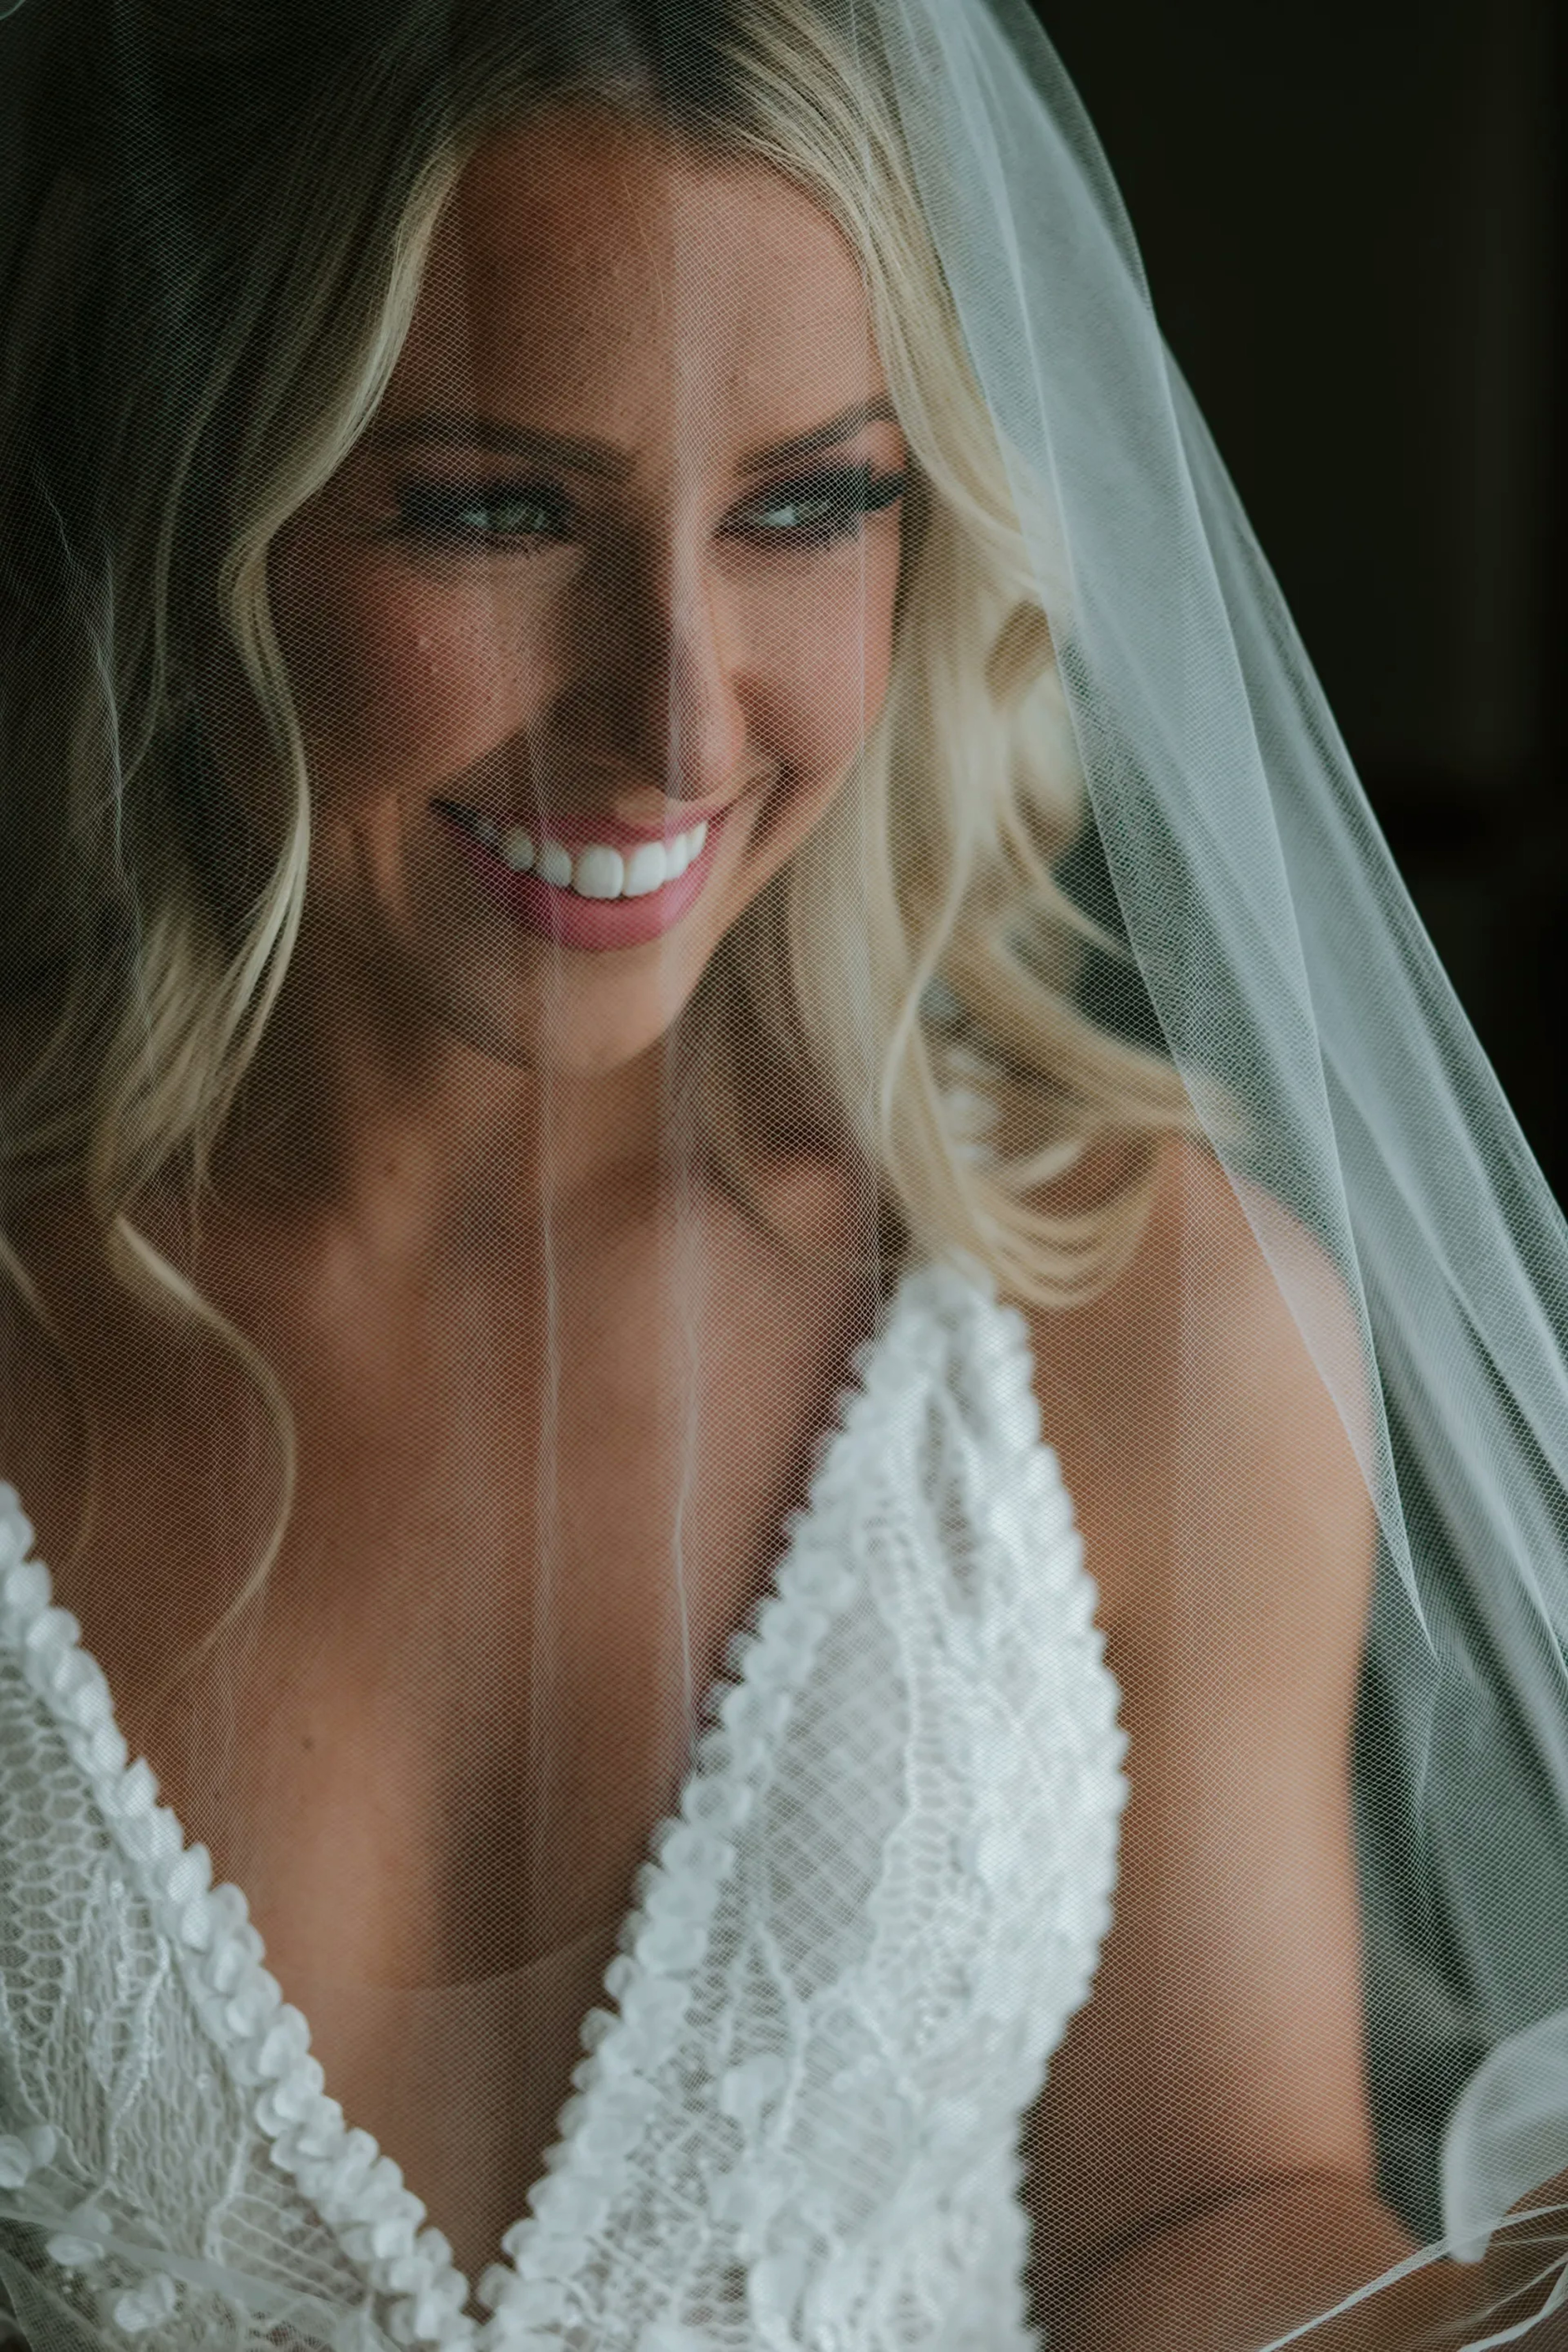 A radiant bride smiles warmly, her happiness captured through her bridal veil, with a close-up showing intricate lace details of her gown.